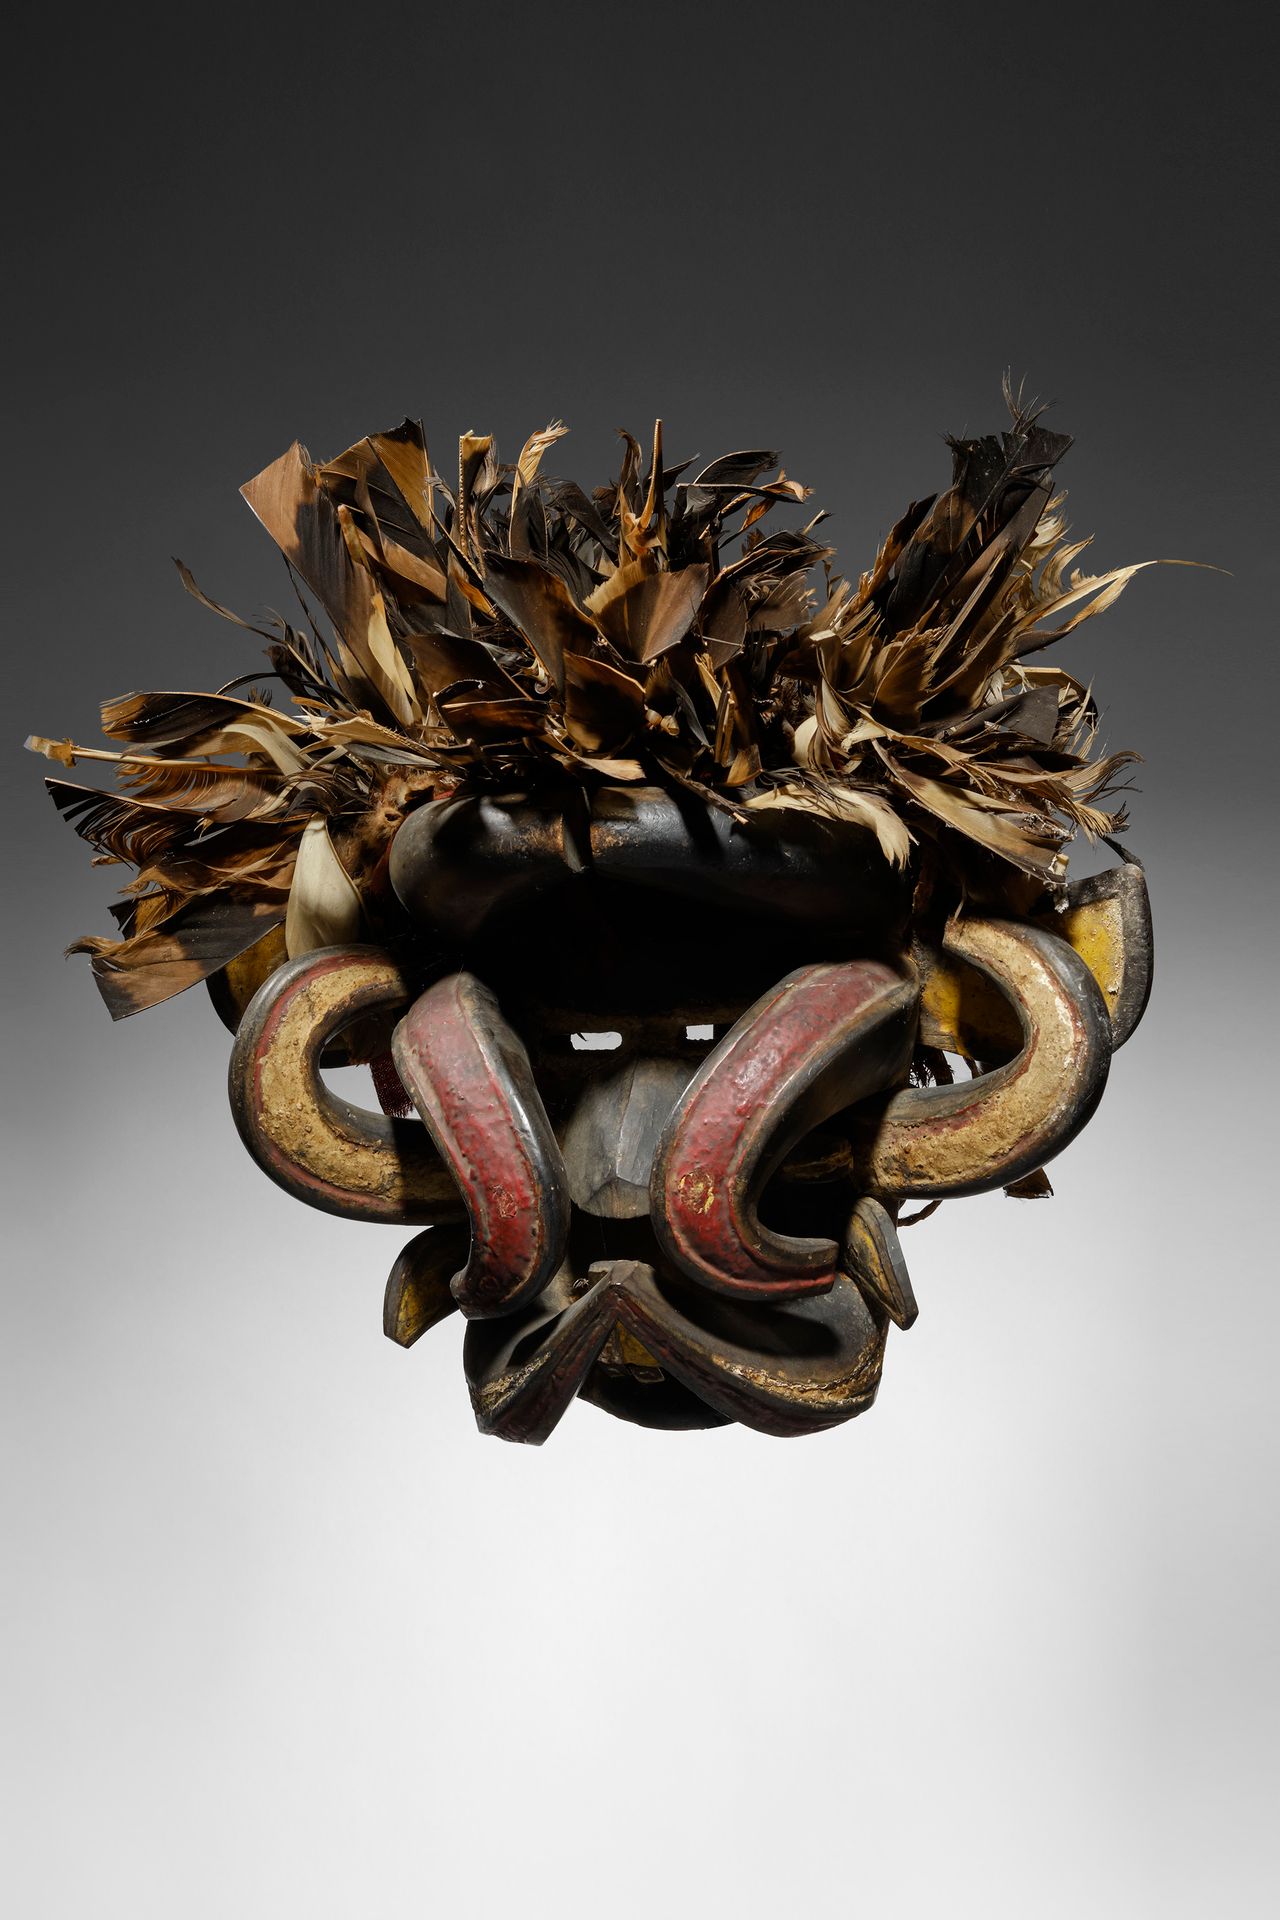 We - Guere Mask Ivory Coast

Wood, feathers, and pigments - 41 cm

Provenance:

&hellip;